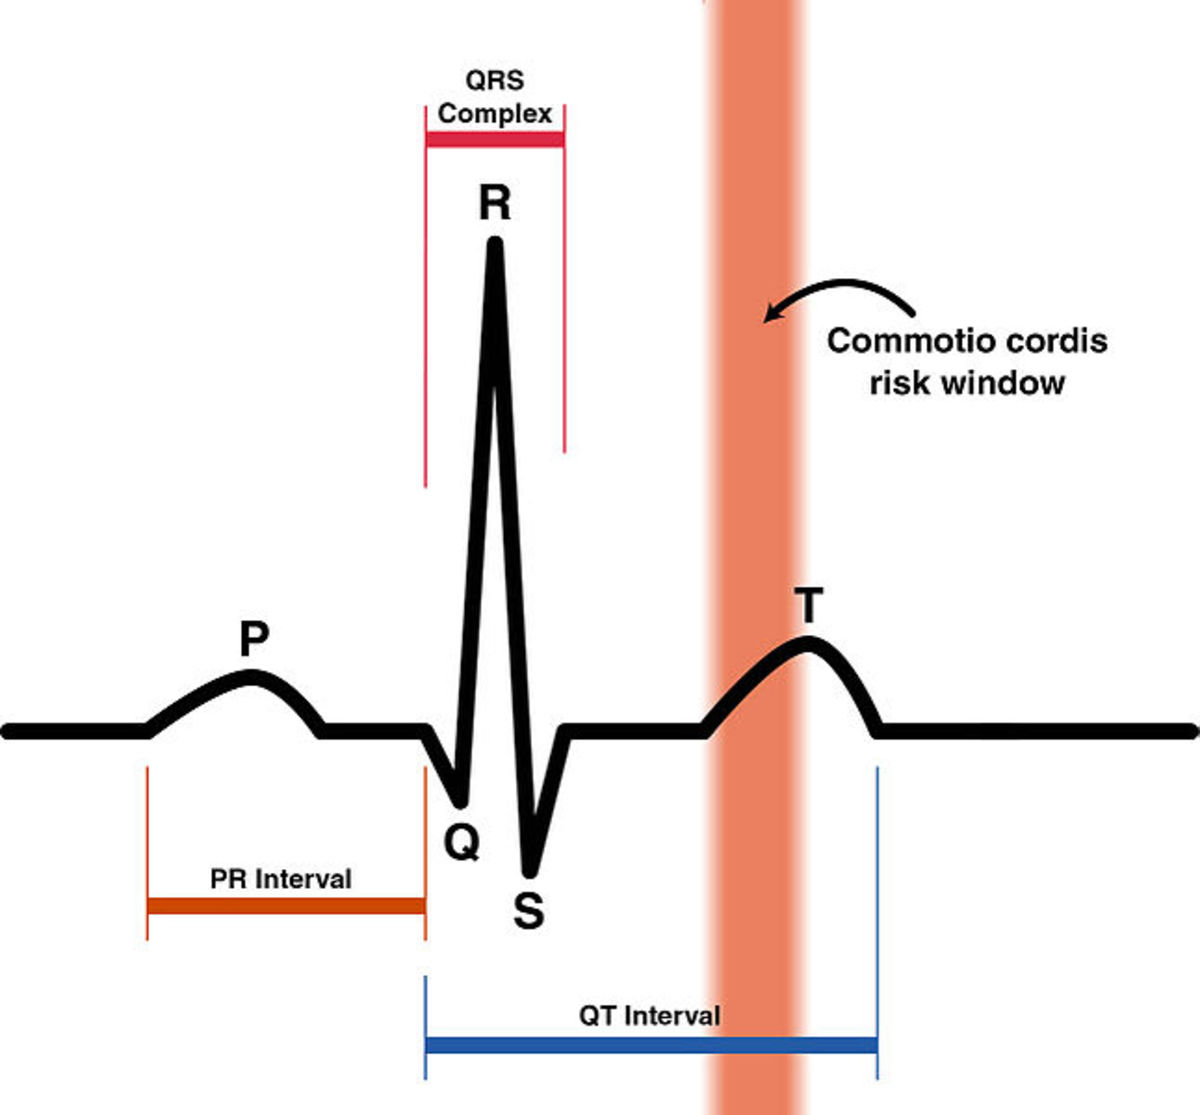 Highlighted in red is the precise moment during the cardiac cycle where interruption of the electrical impulse occurs.